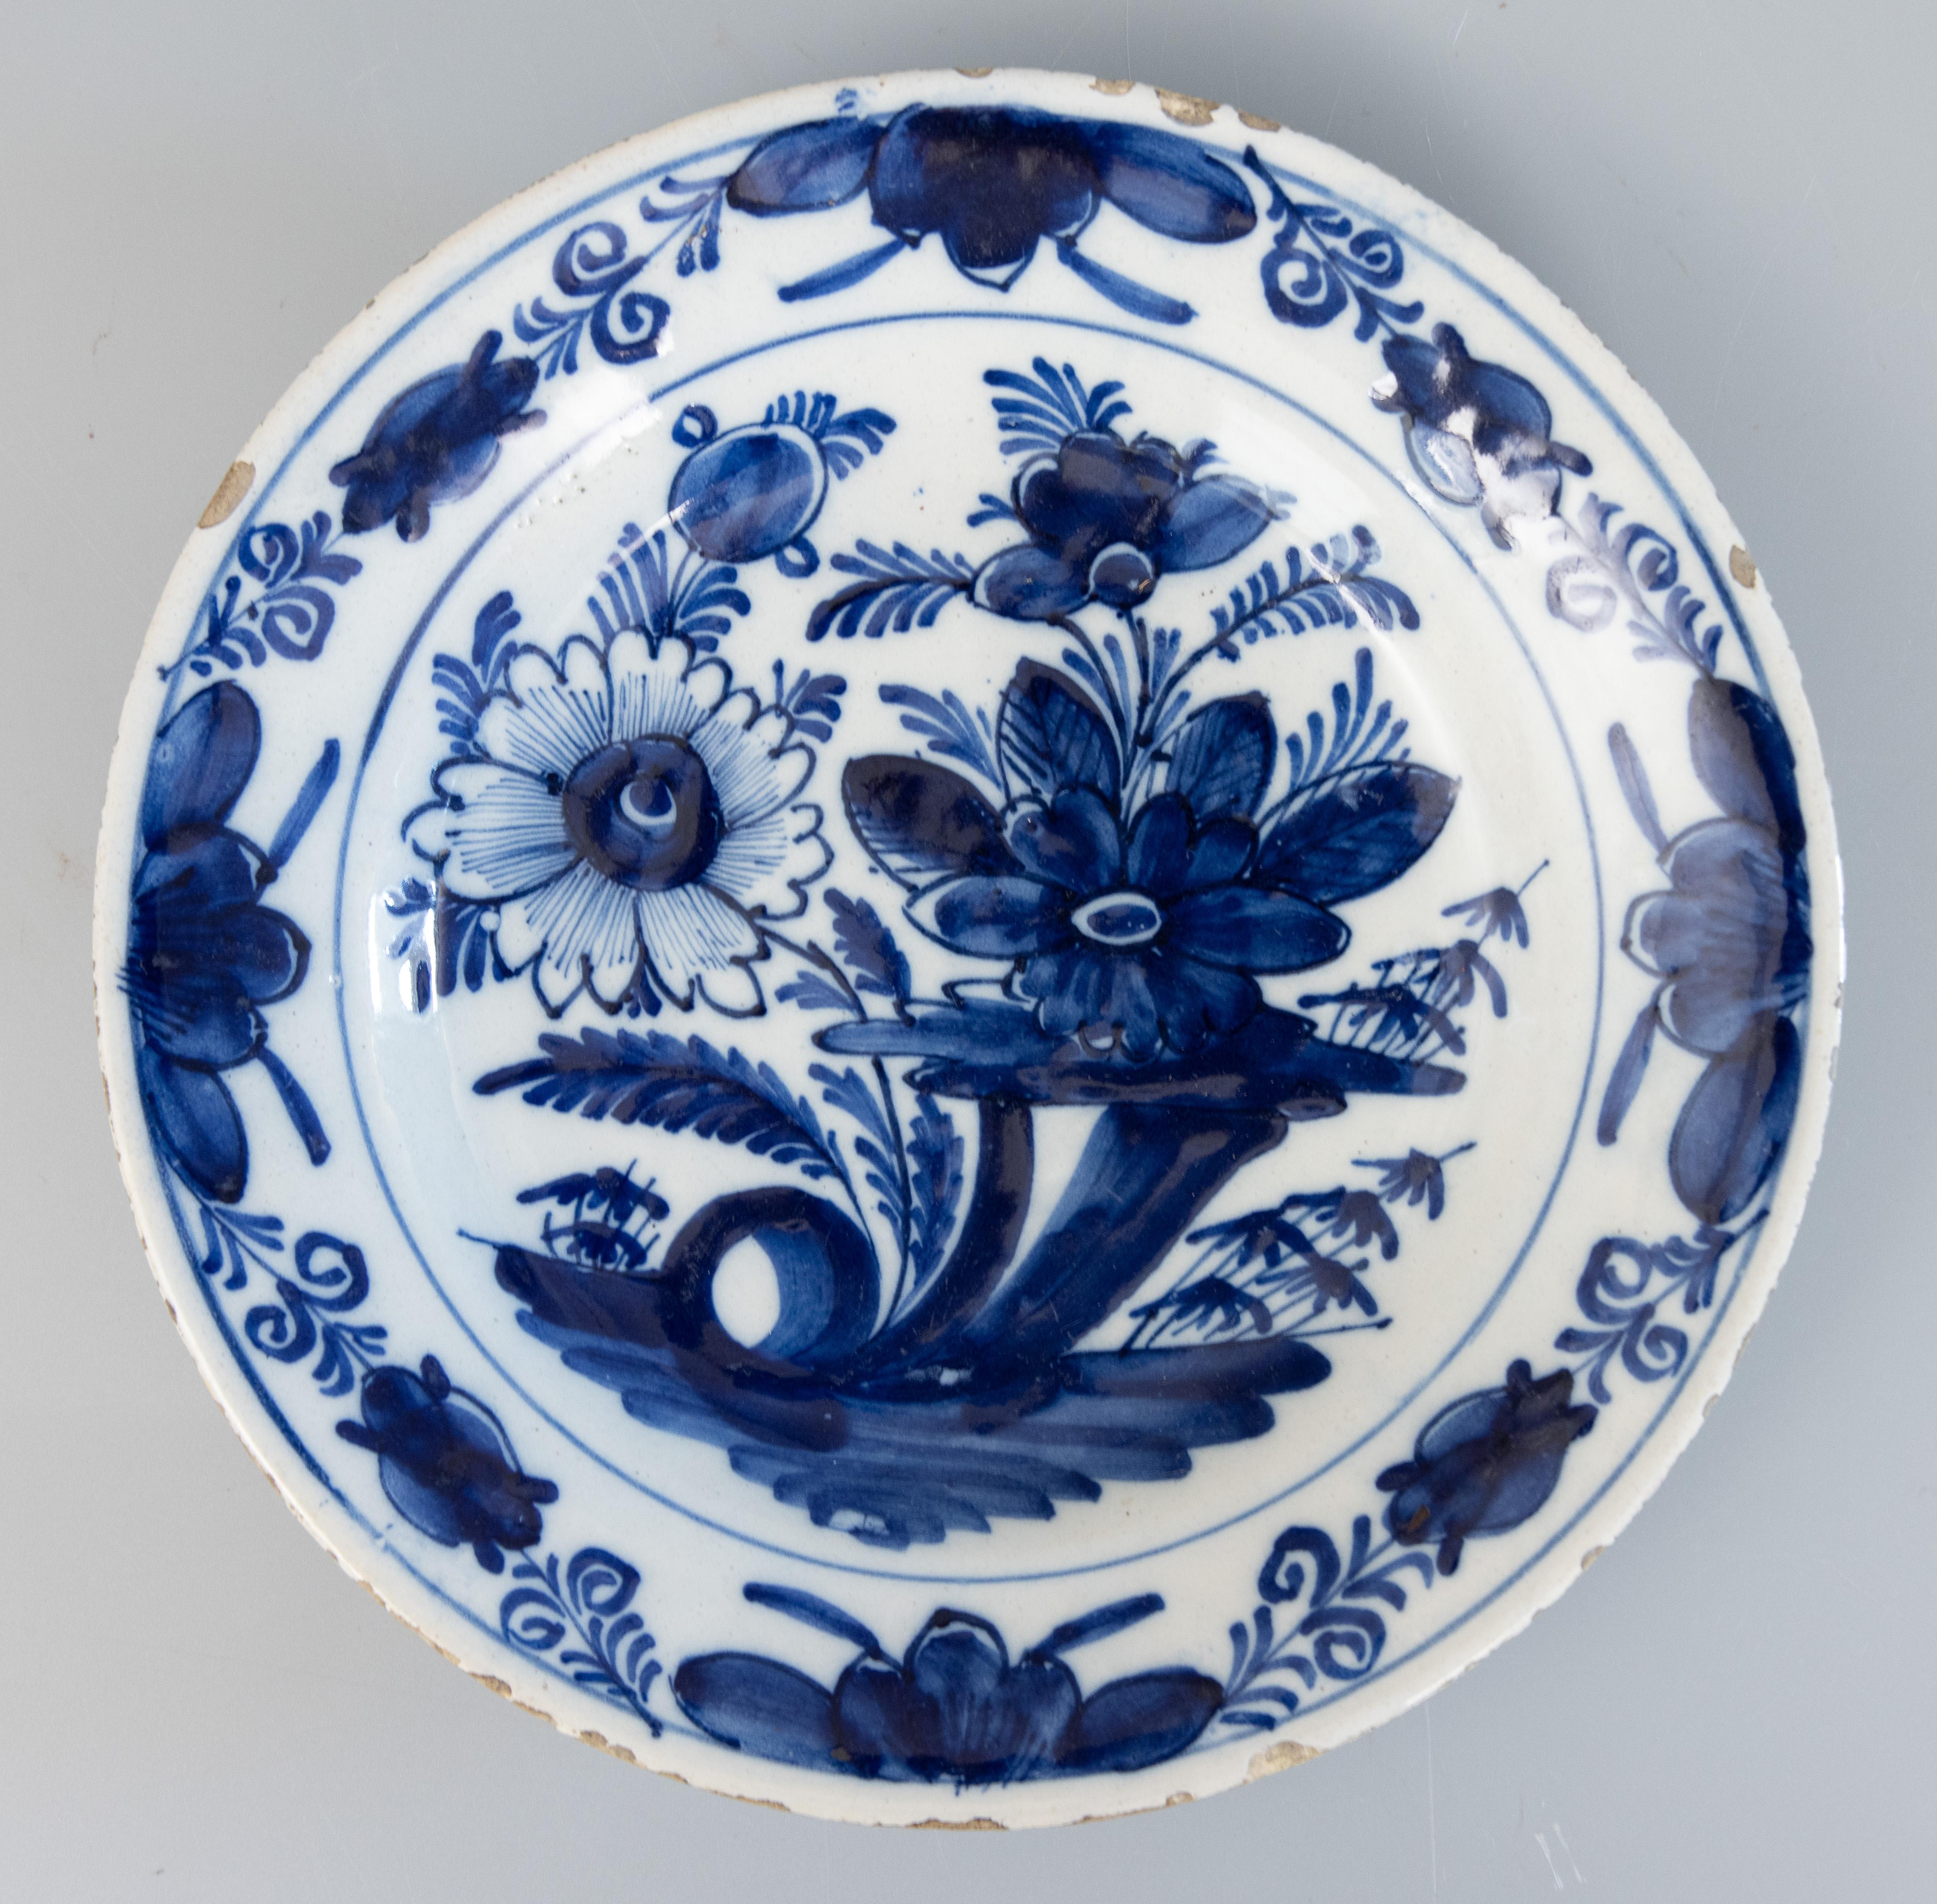 A gorgeous pair of antique 18th-Century Dutch Delft faience flower garden plates. These lovely plates have a hand painted floral and foliate design in vibrant cobalt blue and white. They would look fabulous displayed on a wall or in a cabinet.